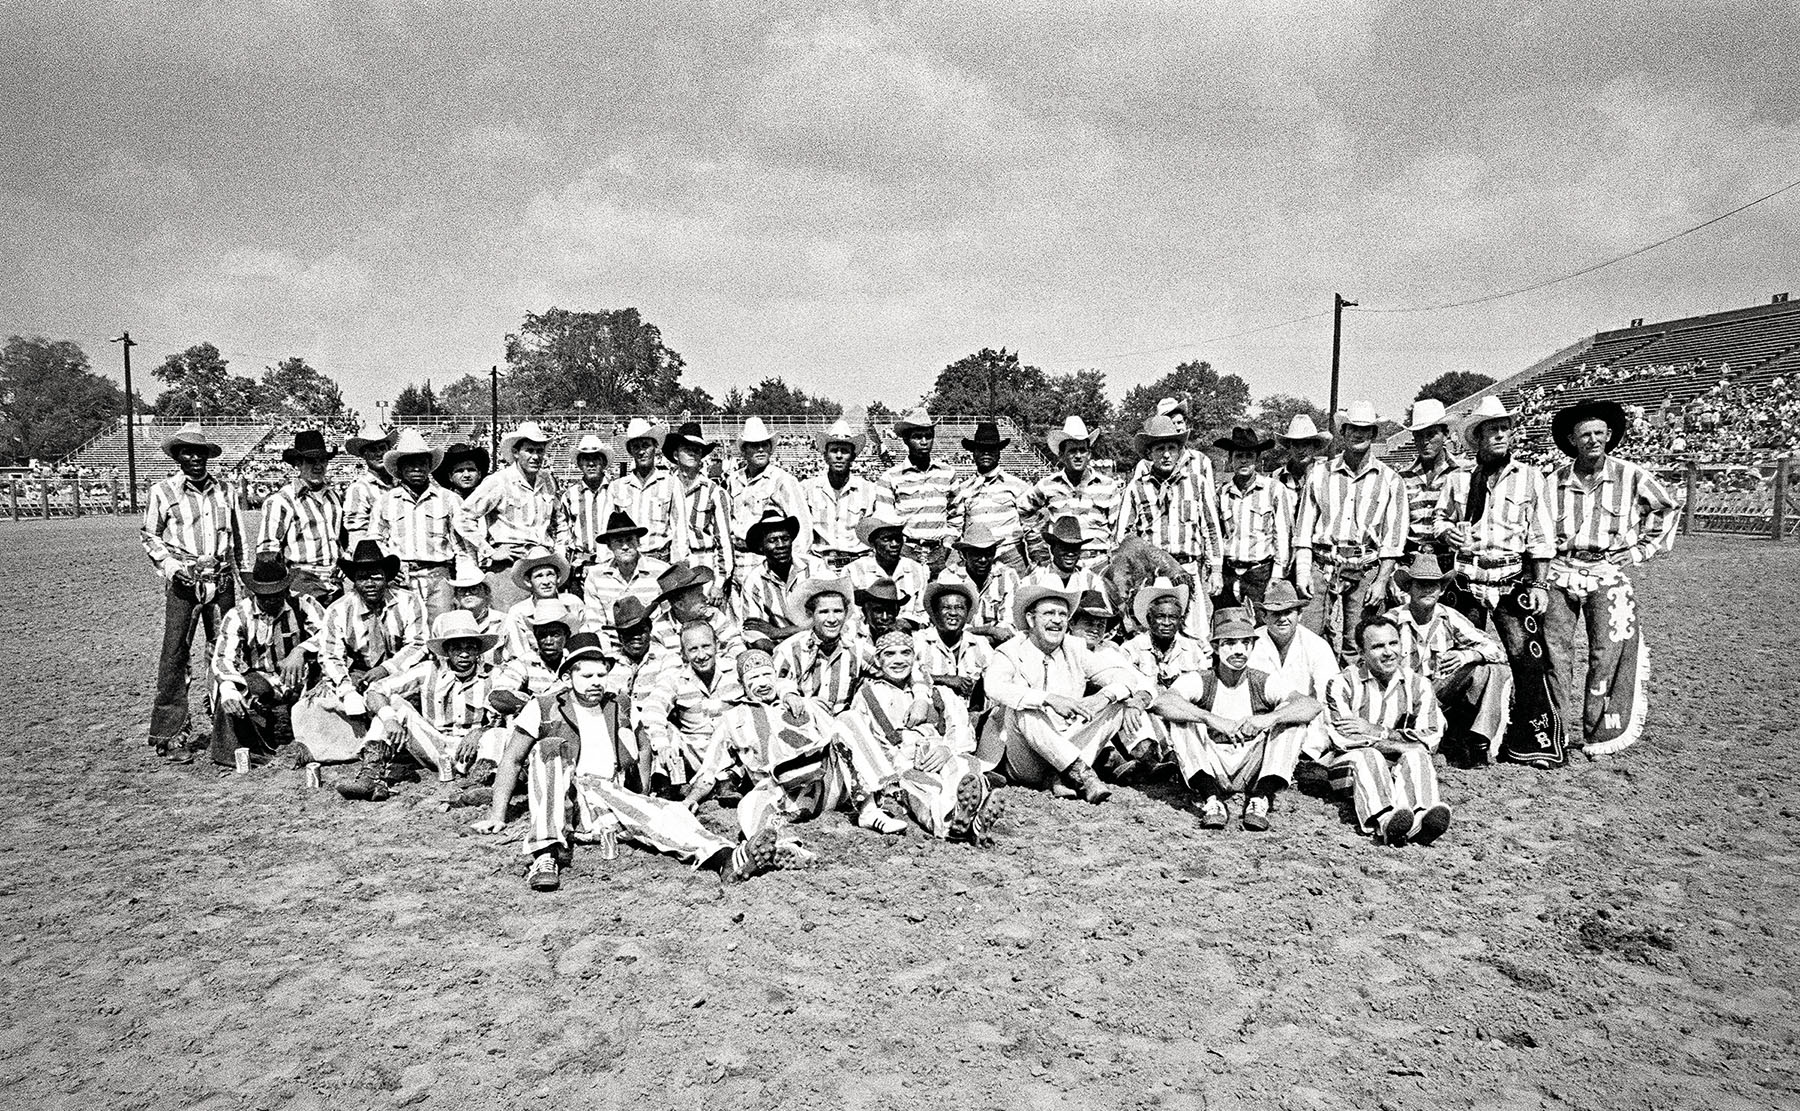 A large group photo of people sitting on the dirt ground